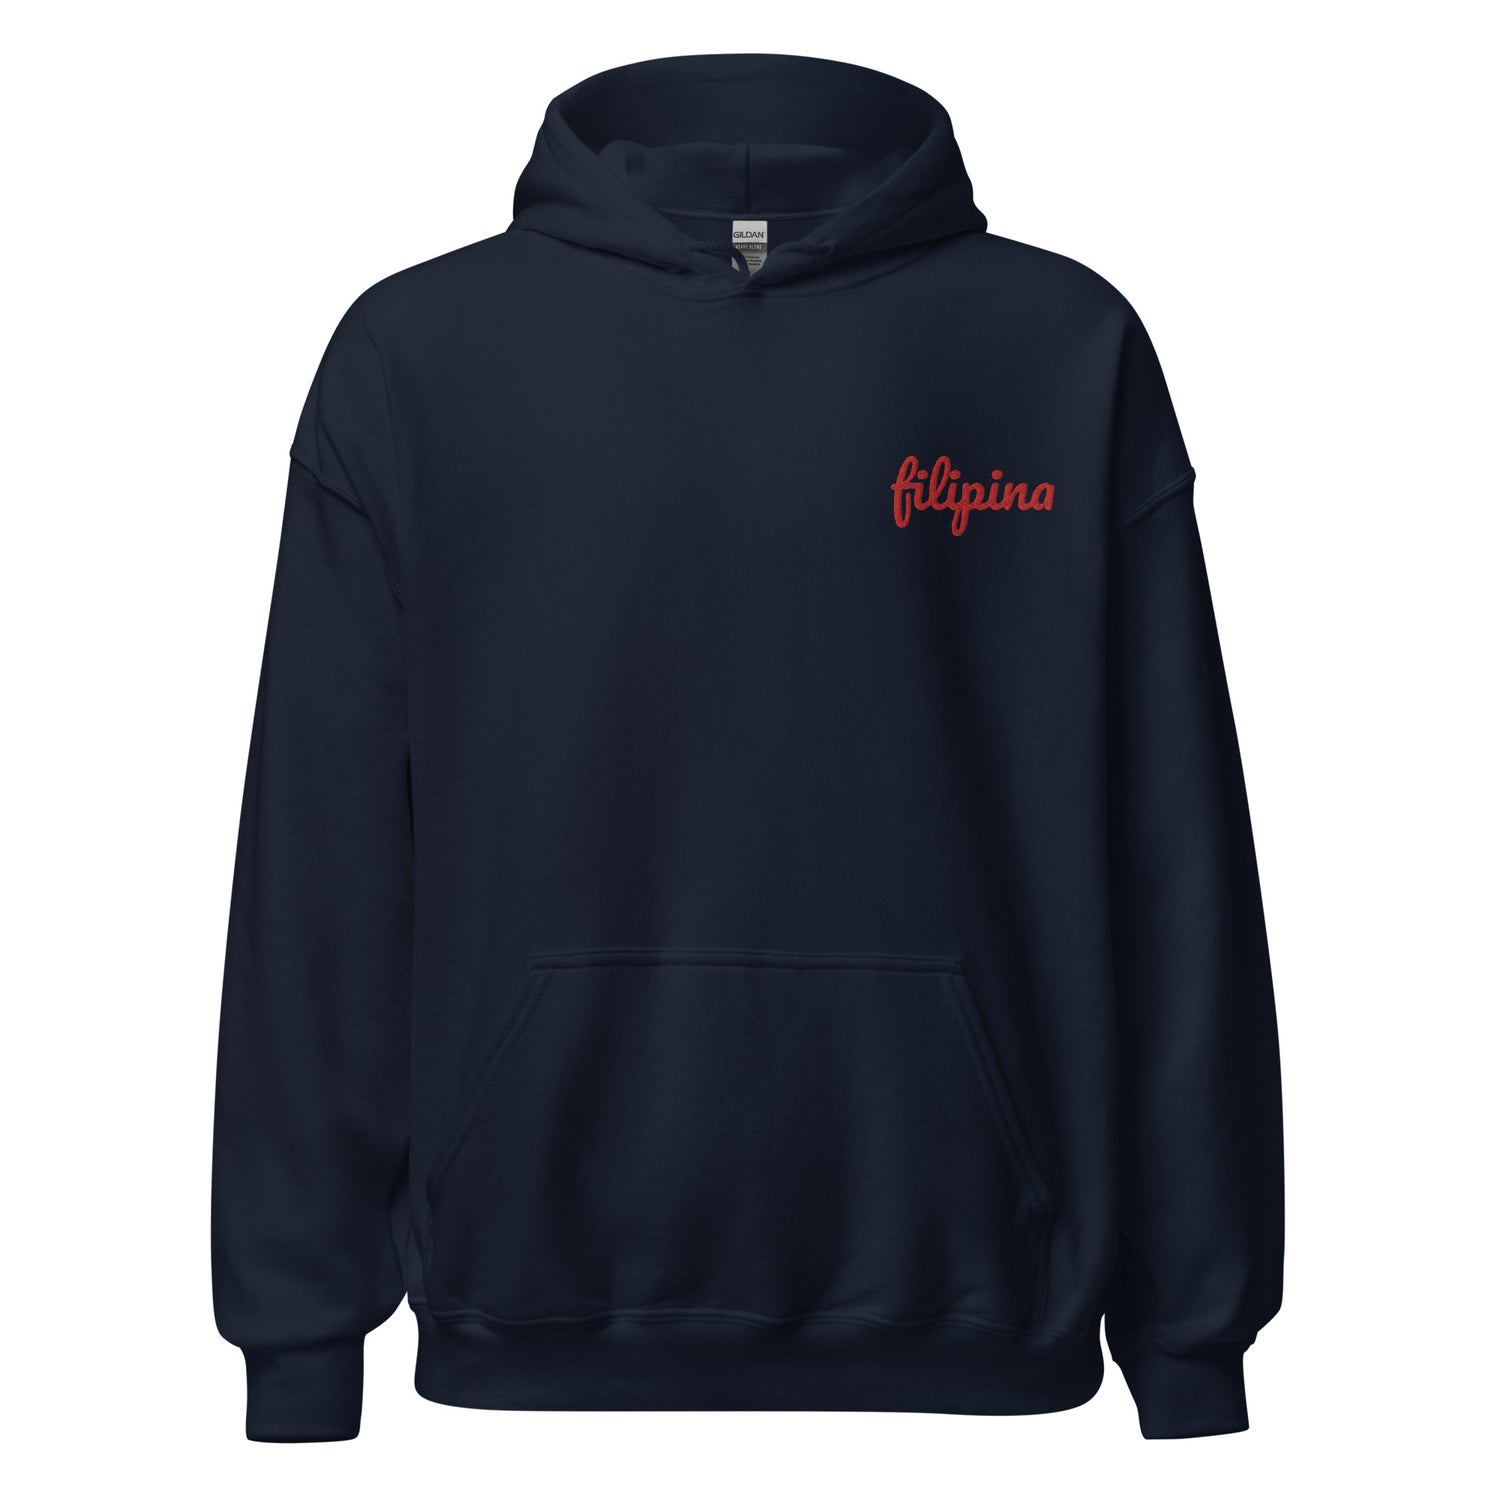 Filipino Hoodie Filipina Statement Embroidered Merch in color variant Navy